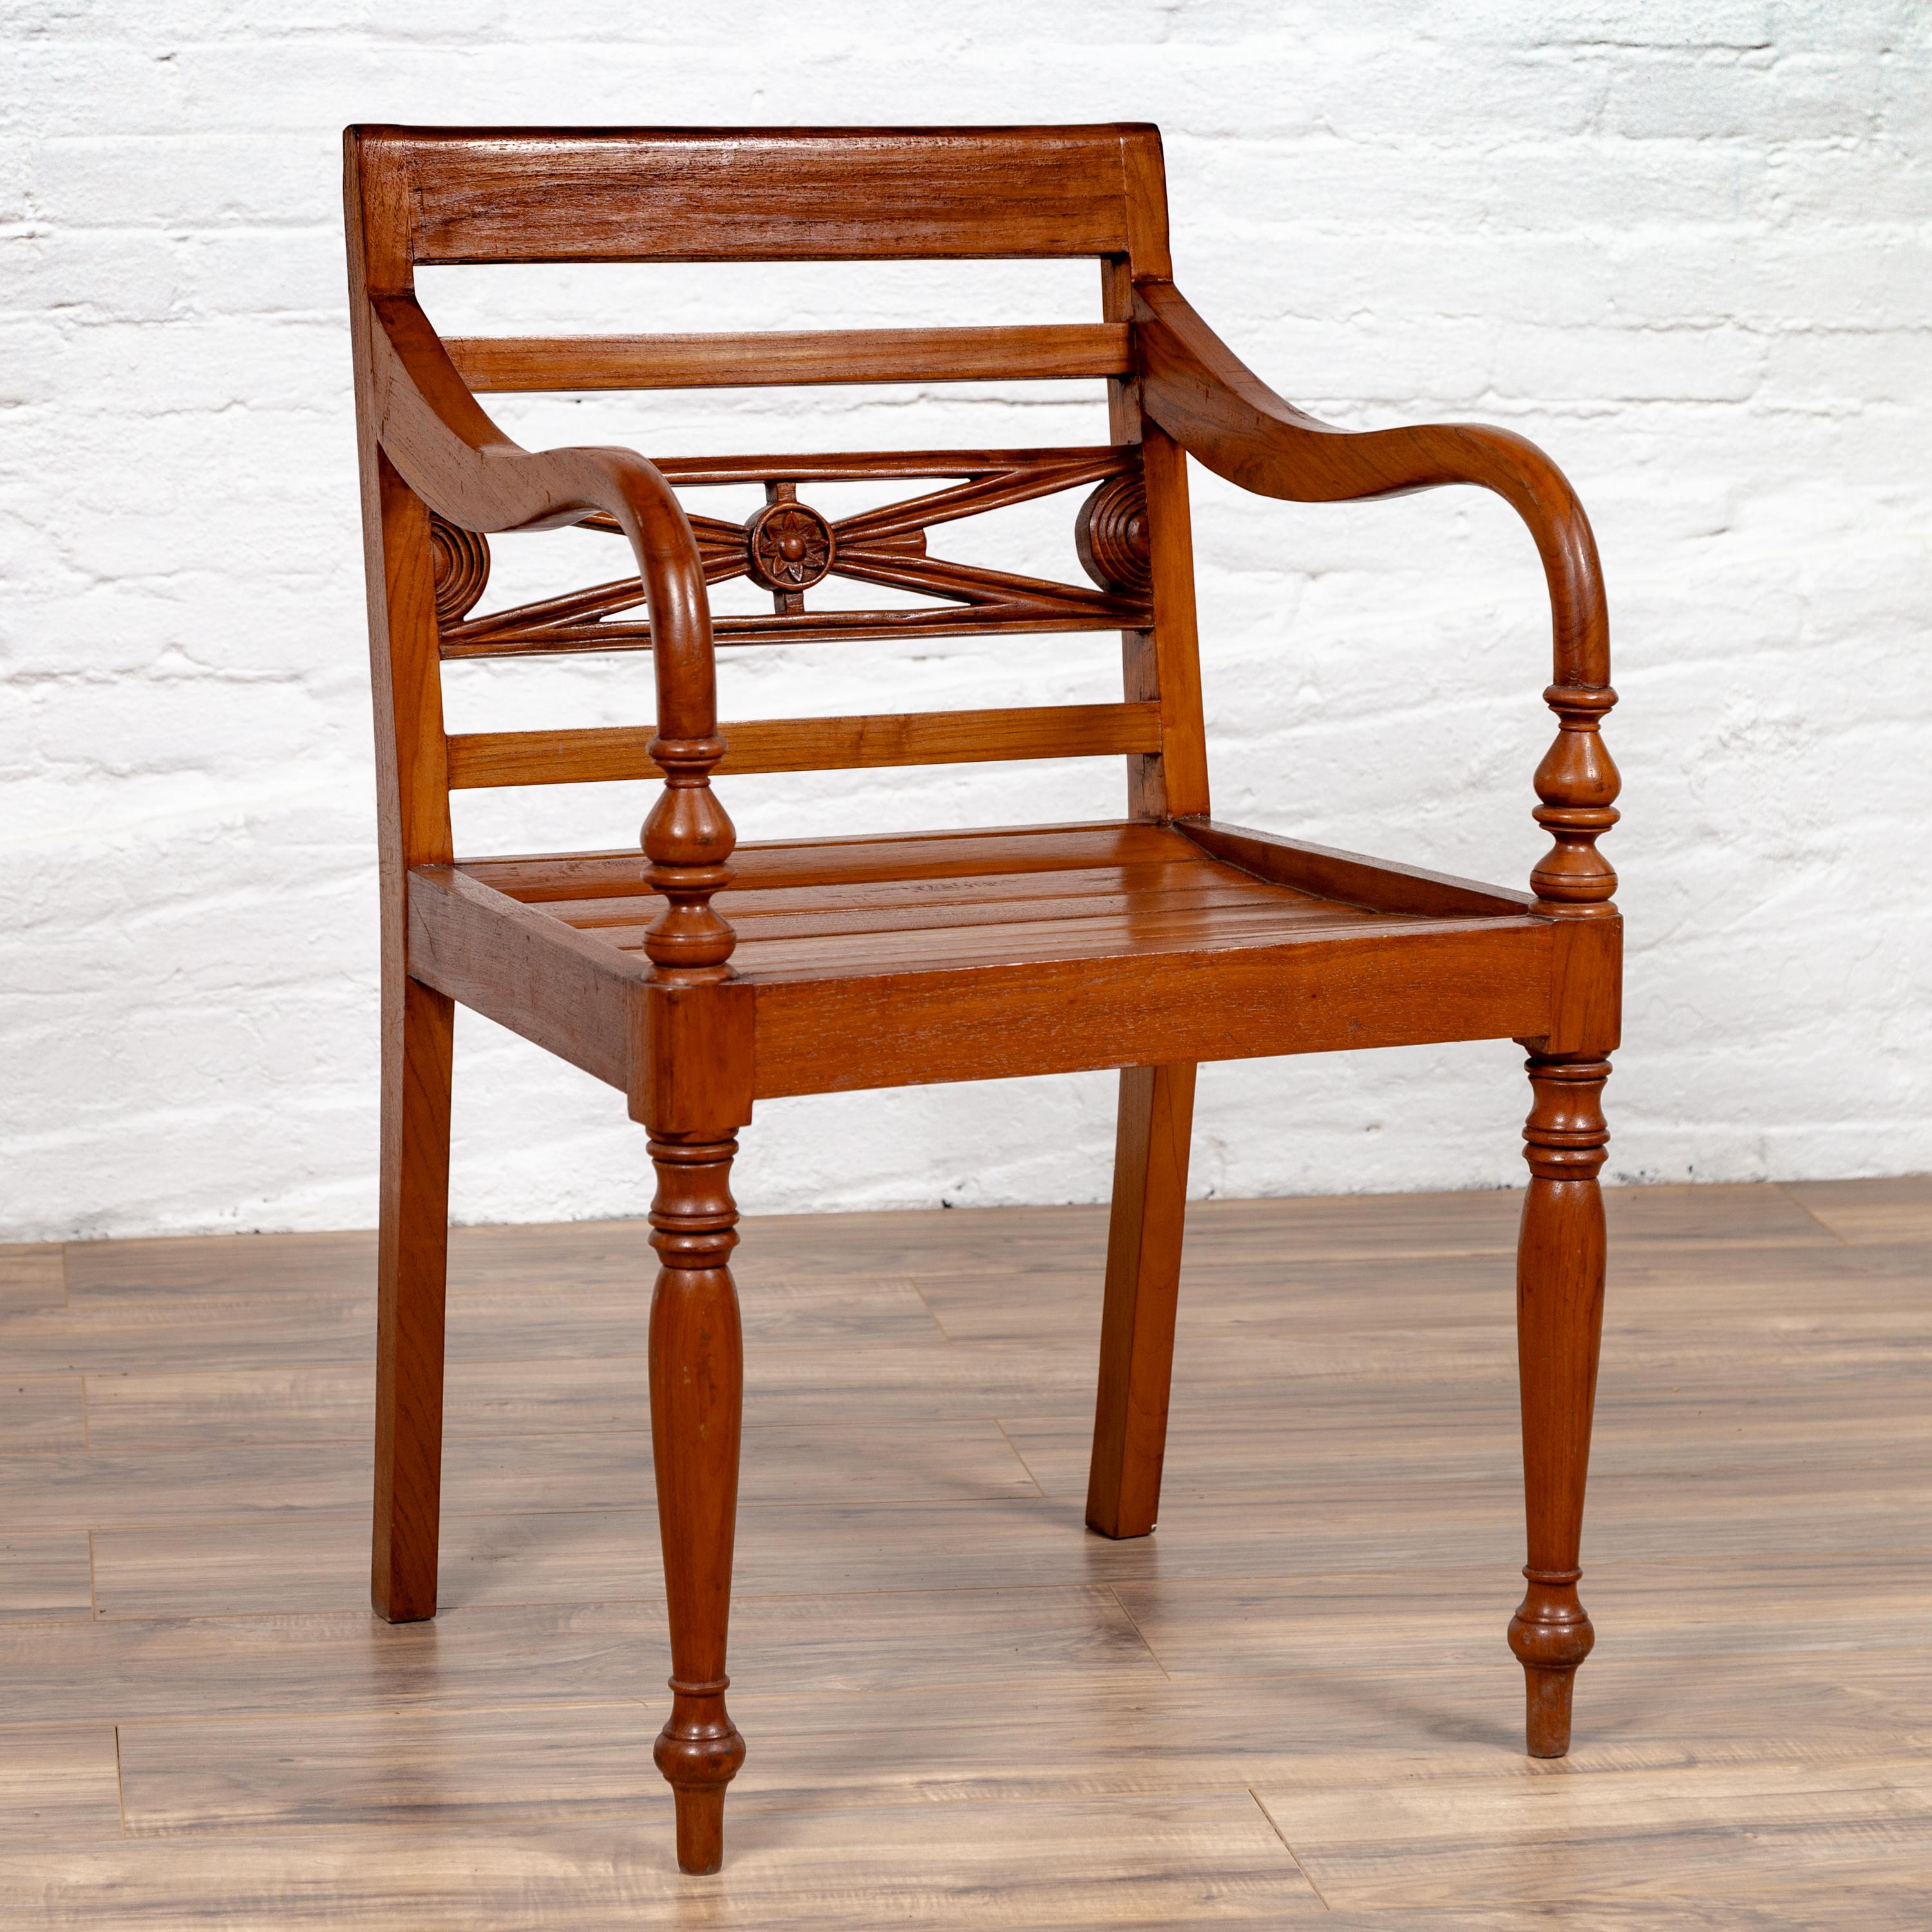 An antique Indonesian captain's chair from the early 20th century, with slatted wood, pierced splat and looping arms. This antique Indonesian captain's chair from the early 20th century is a standout piece with its slatted wood construction,